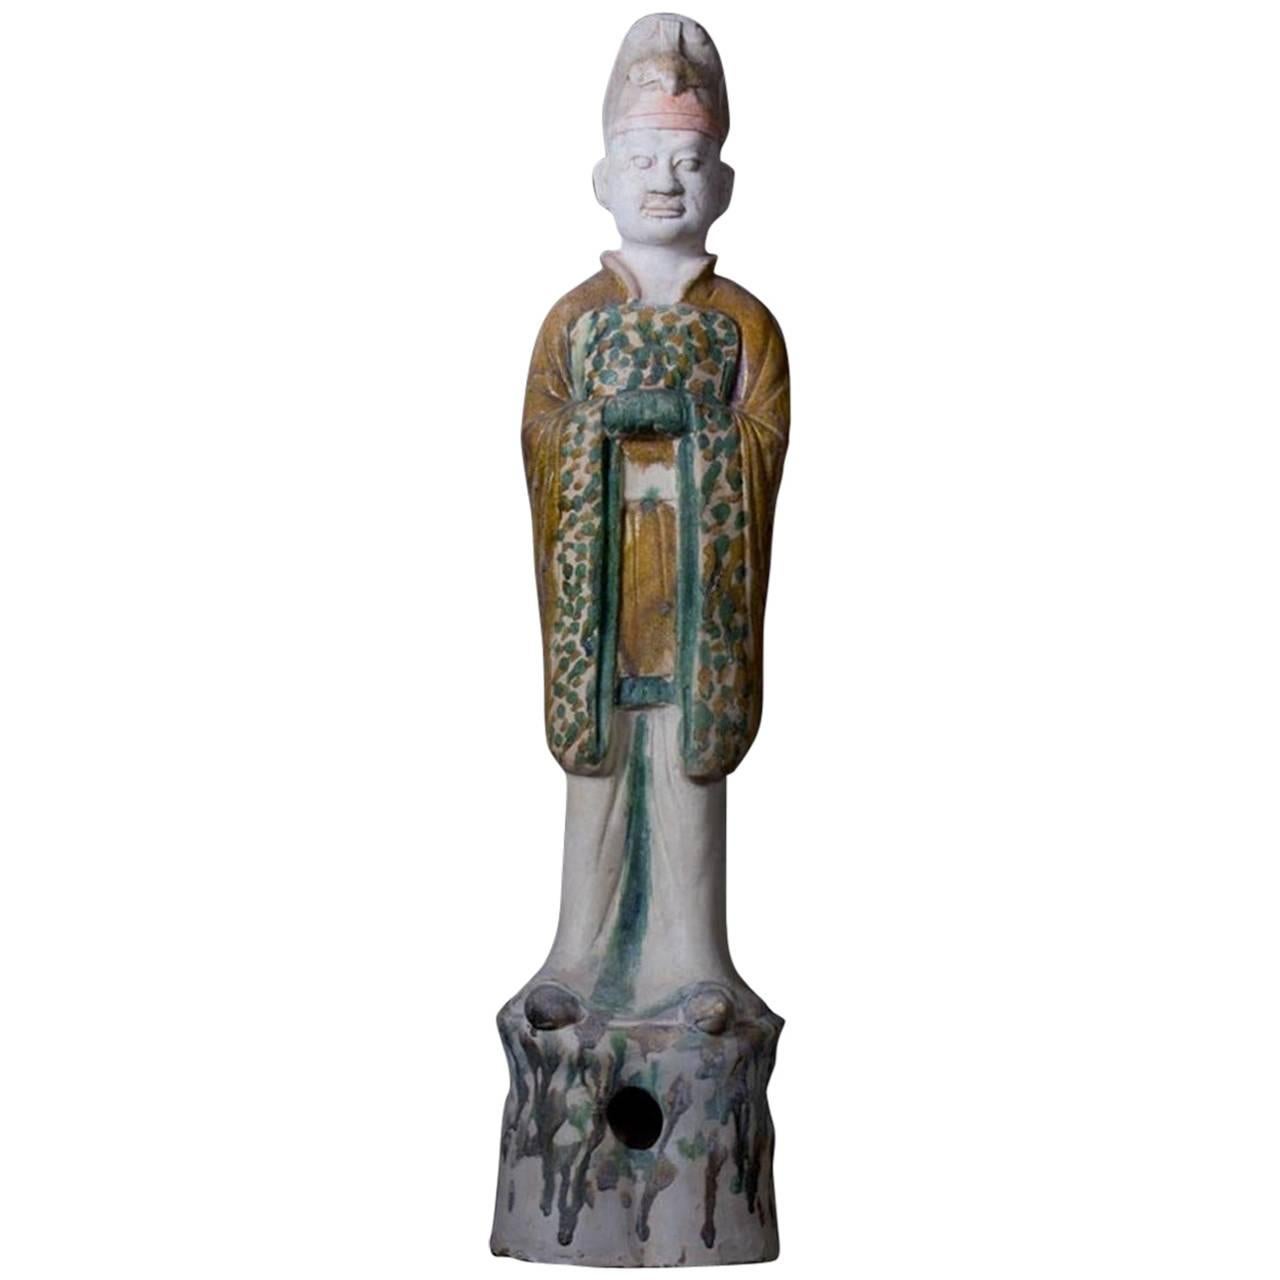 Tang Dynasty Court Official in Sancai Glazed Robes, China '618-907' - TL Tested For Sale